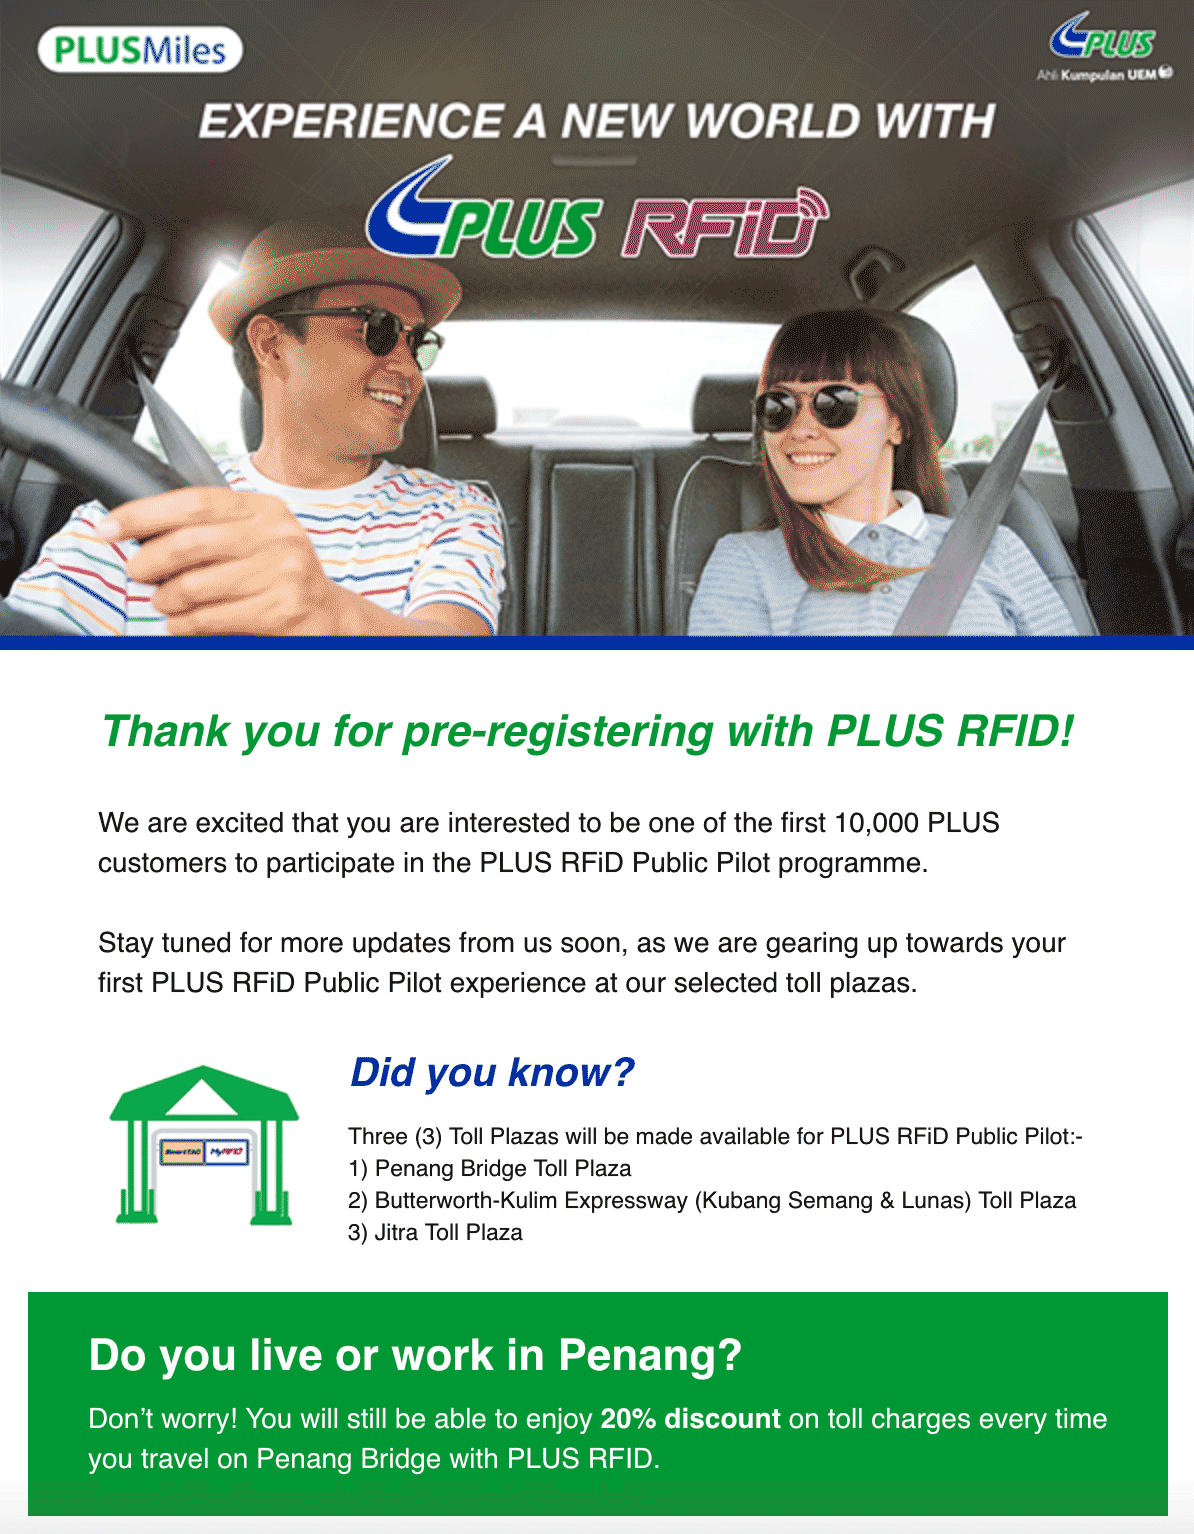 PLUS RFID offers 20% discount for Penangites travelling on the Penang Bridge